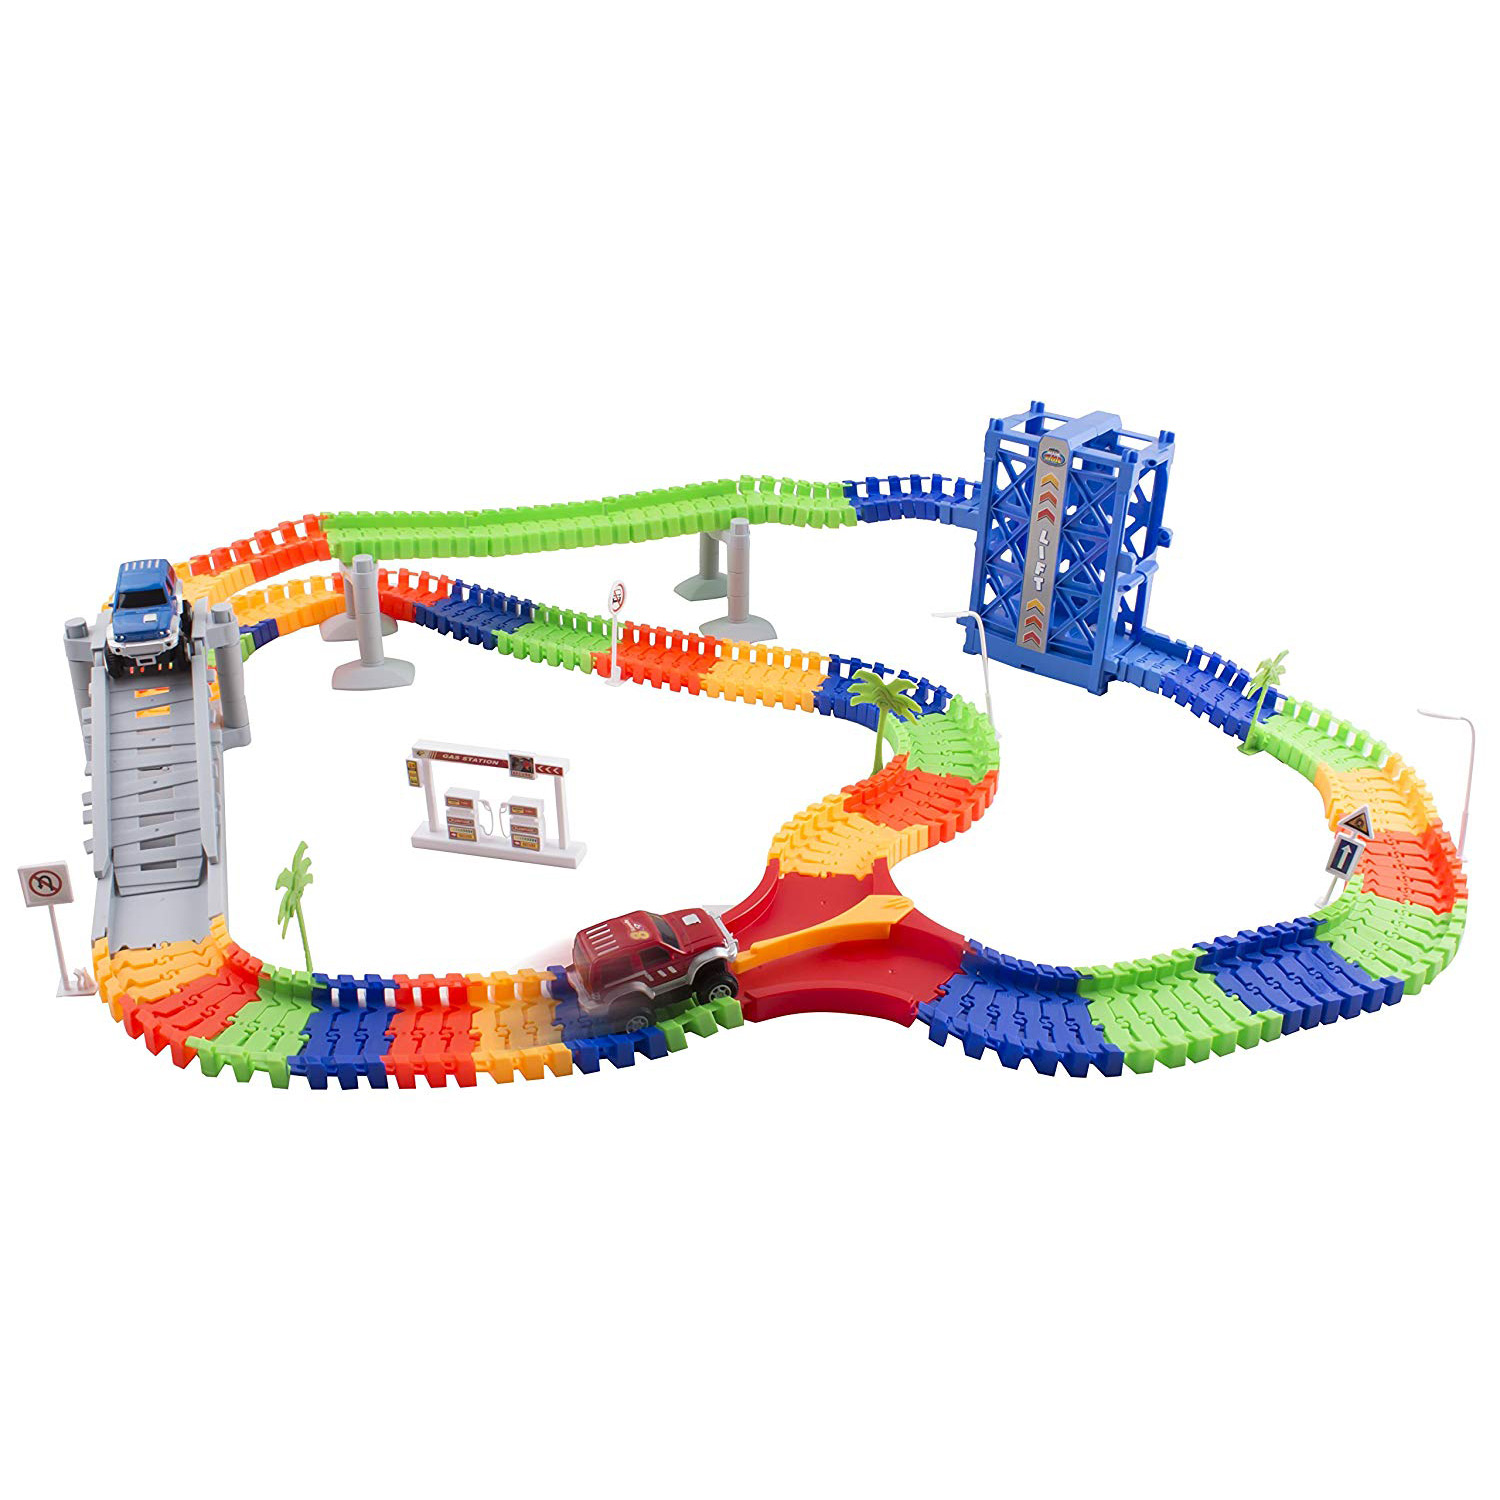 Race Car Track Set Toy Educational Twisted Flexible Building Tracks 240 Pieces Racetrack 2 Cars with Lifter Bridge Trees Gas Station for Children Ages 3 4 5 6 Year old Kids Toys Unisex Boys And Girls